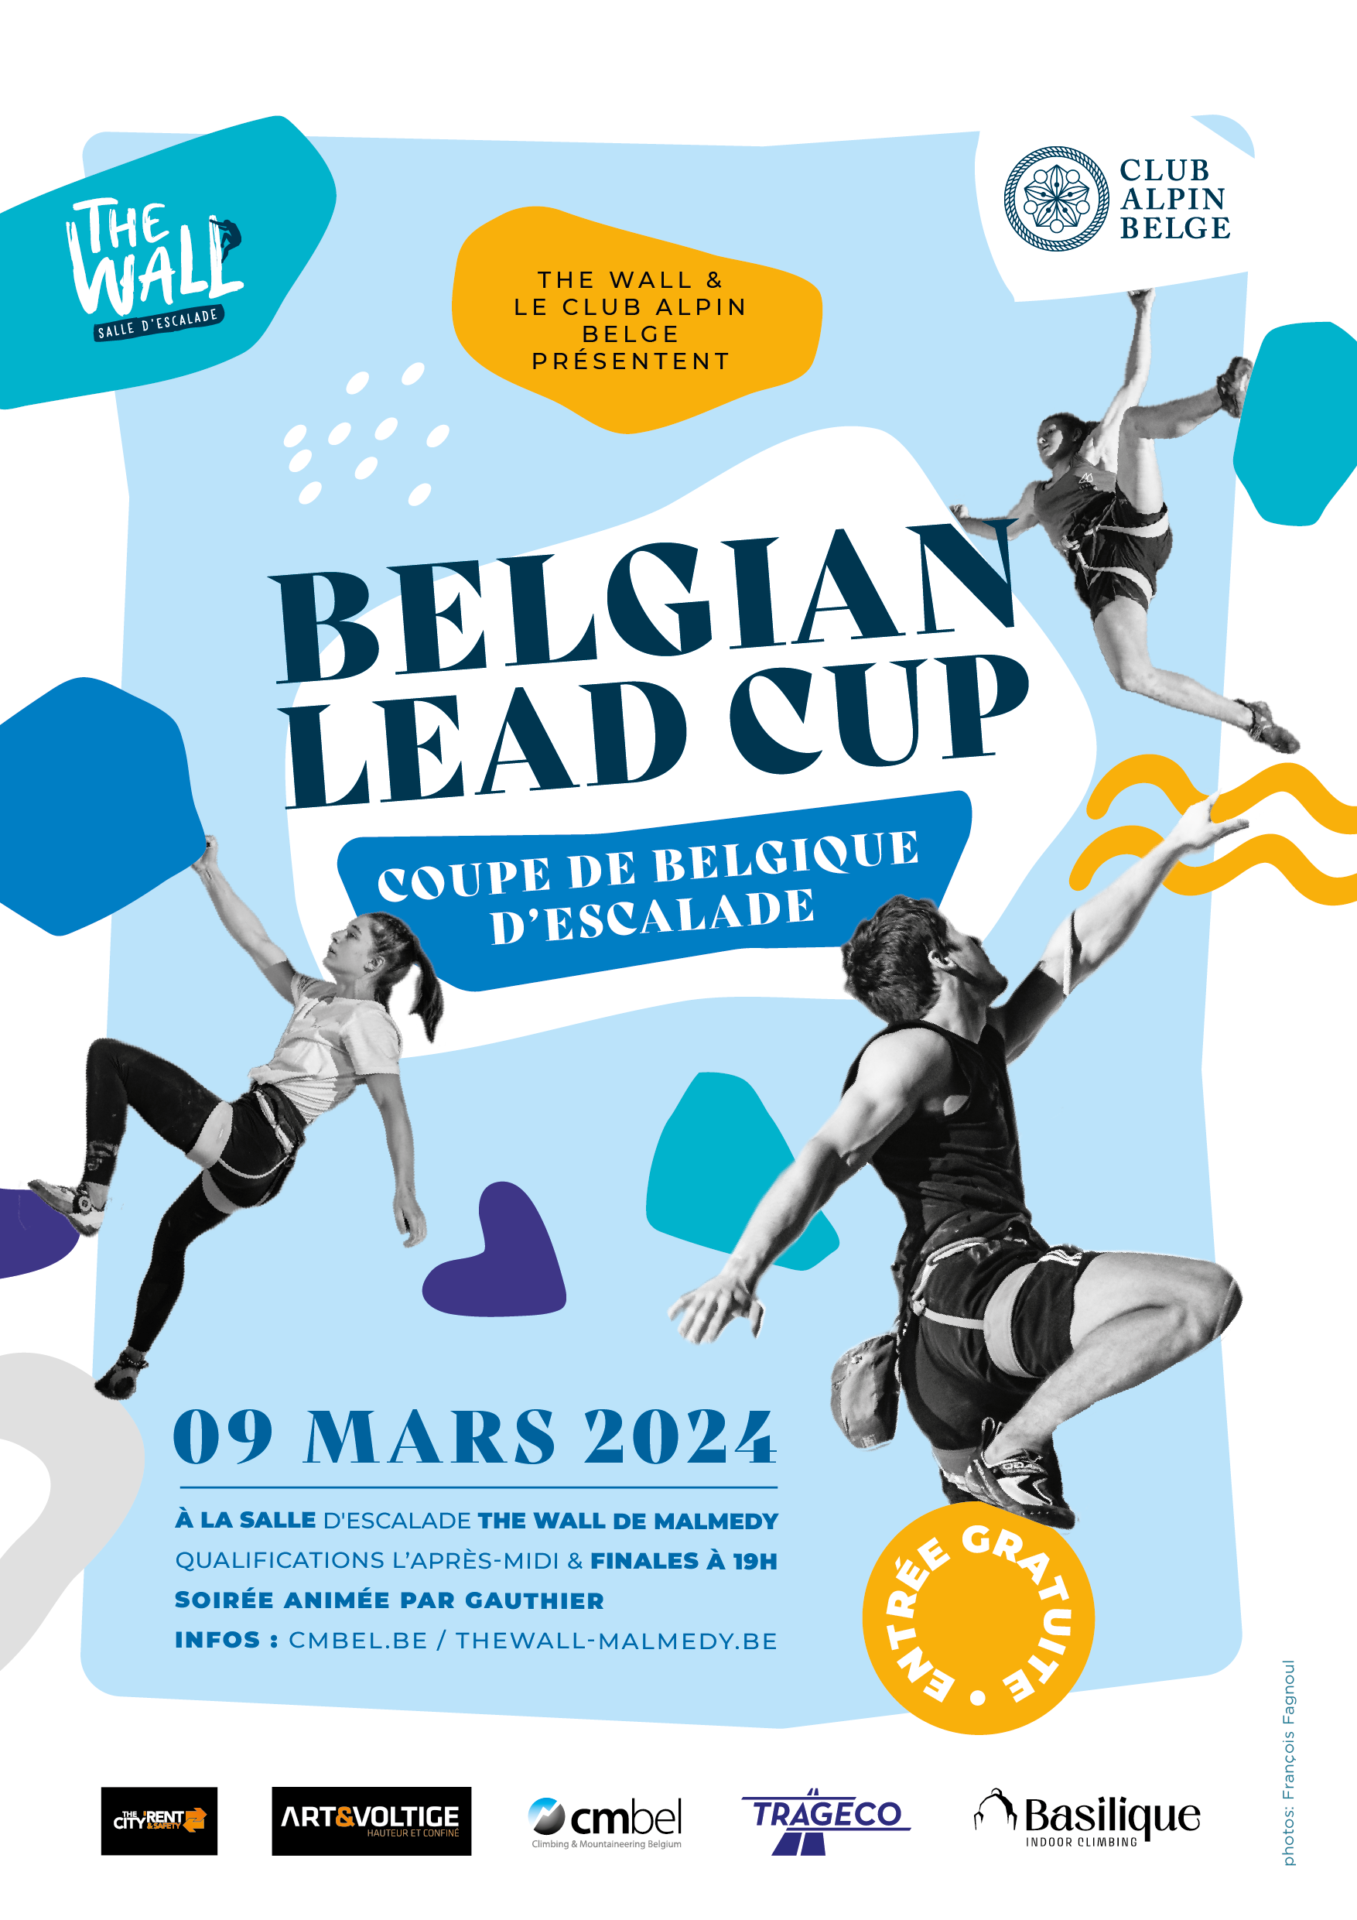 The Wall presents : Belgian Lead Cup 2024 / Live stream starts Saturday 09 March at 6.30pm